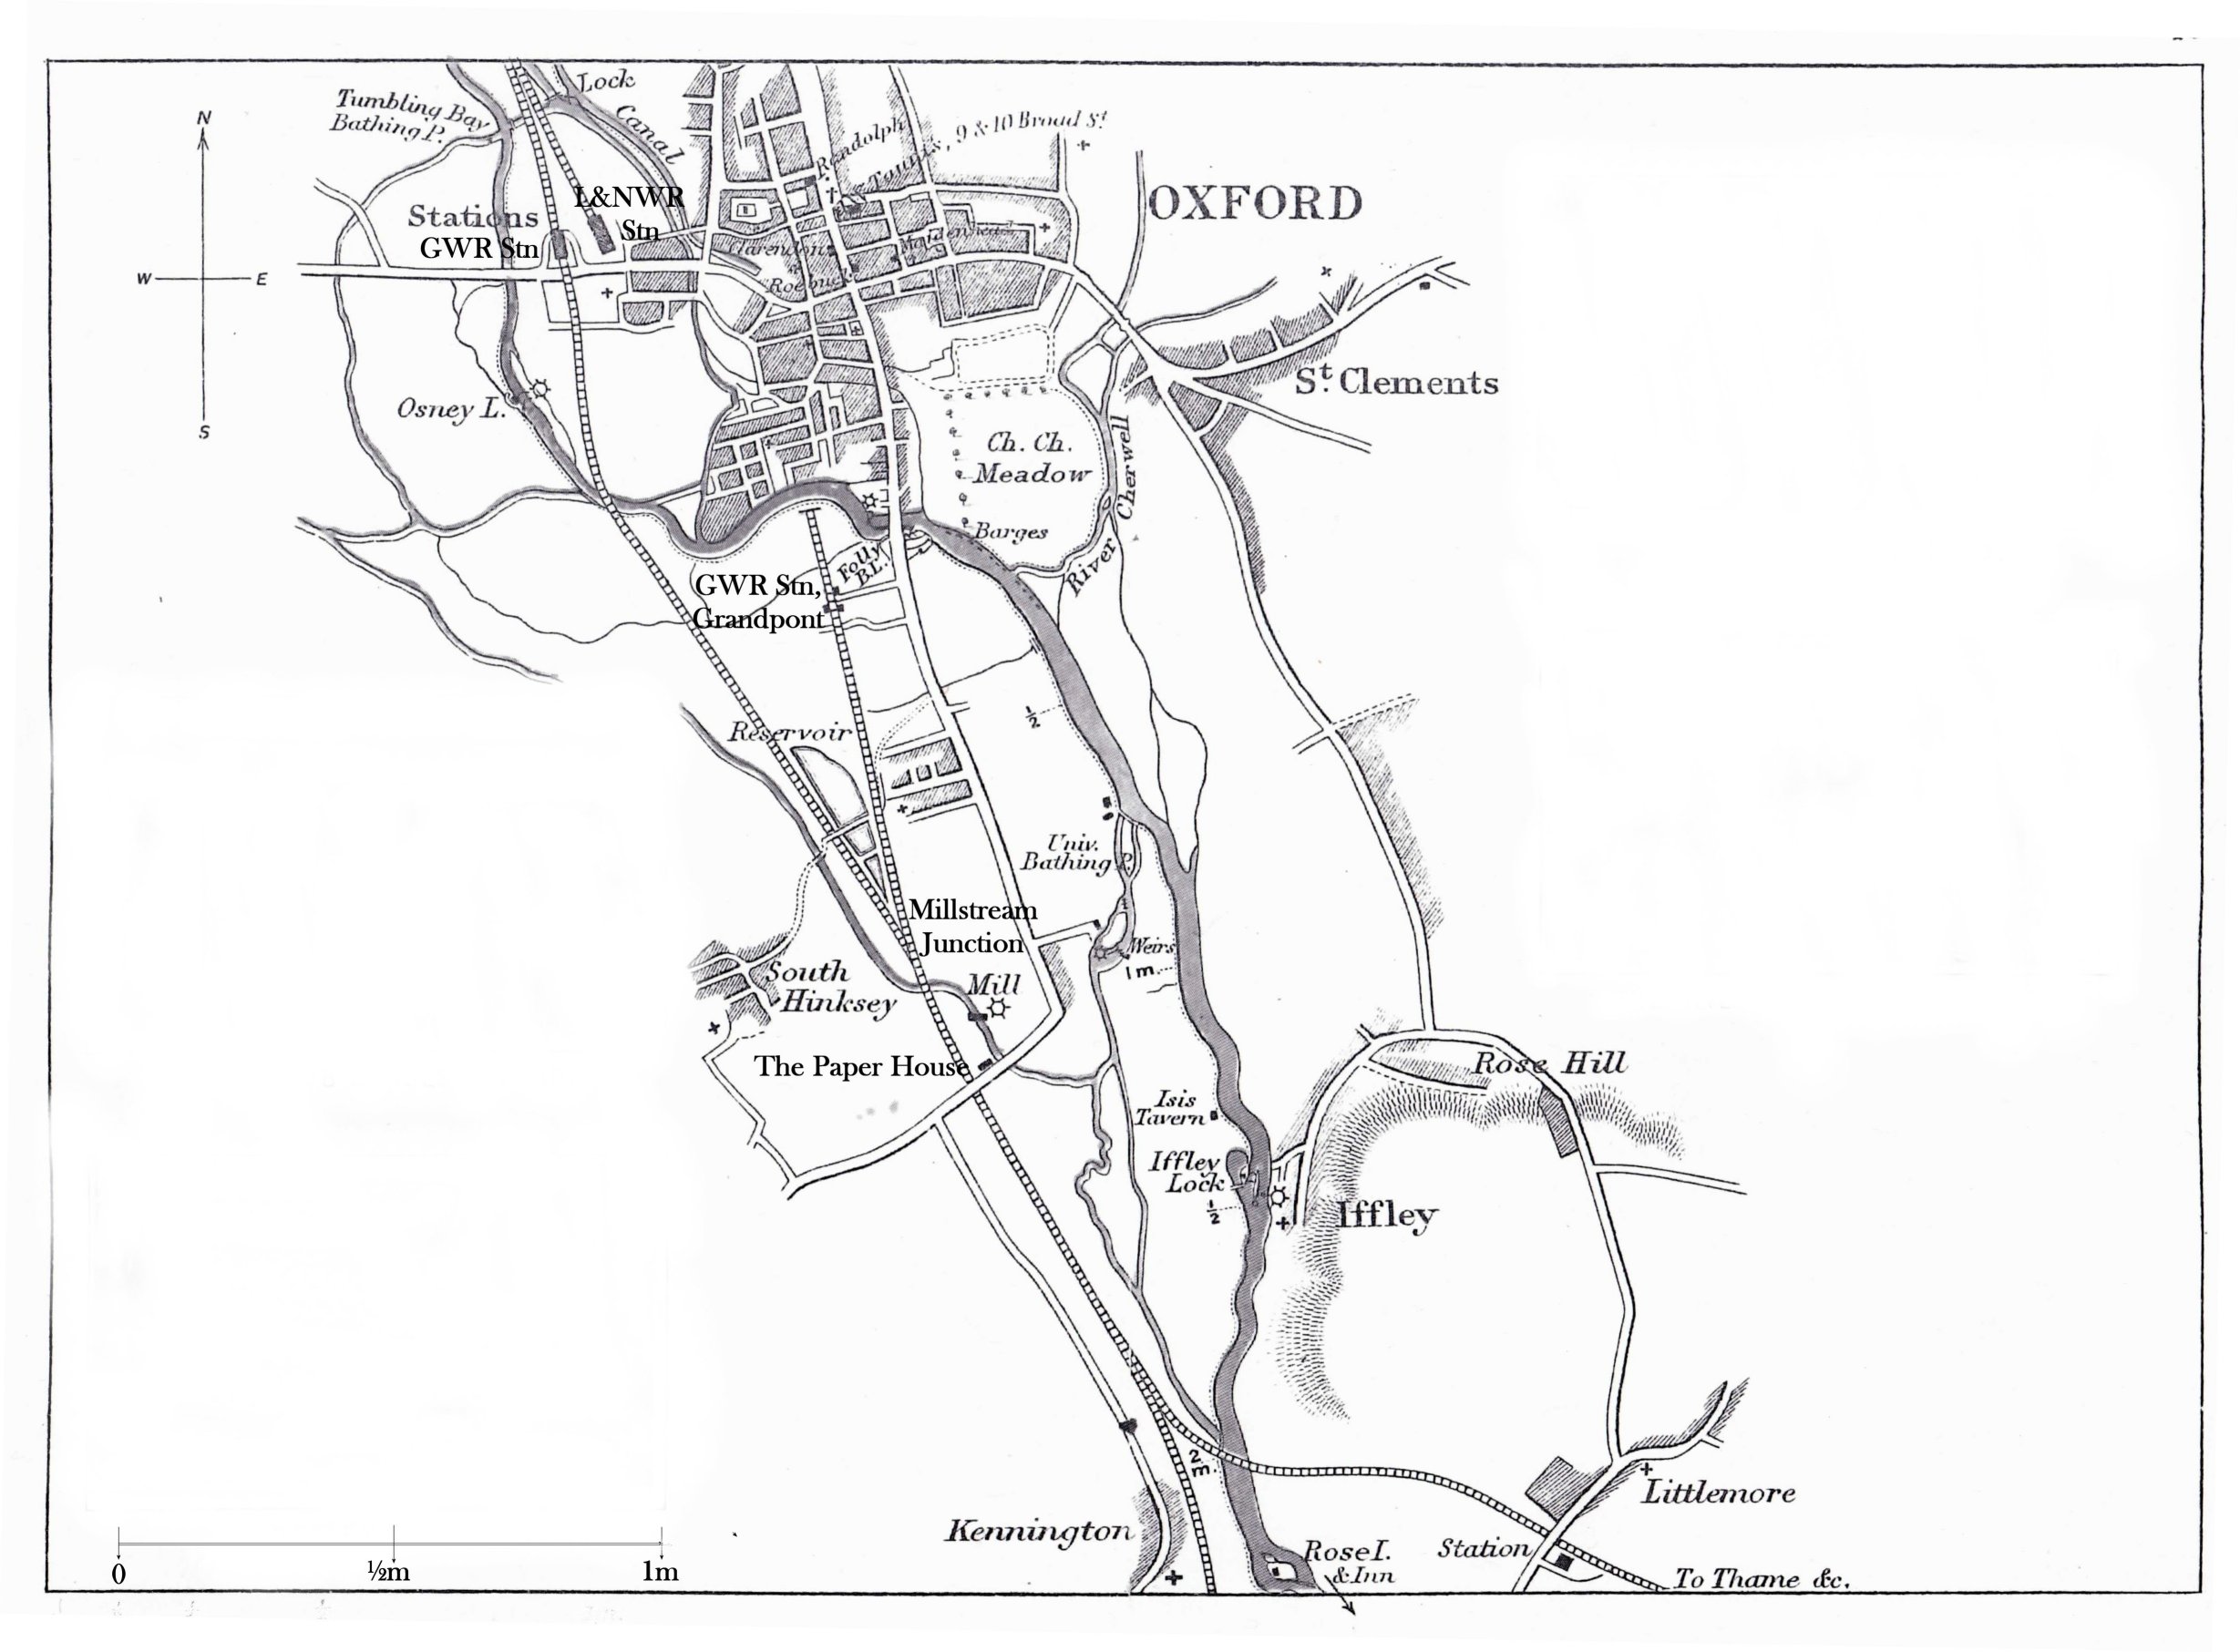 Taunt map of Thames in Oxford 1879 with additional labels smaller